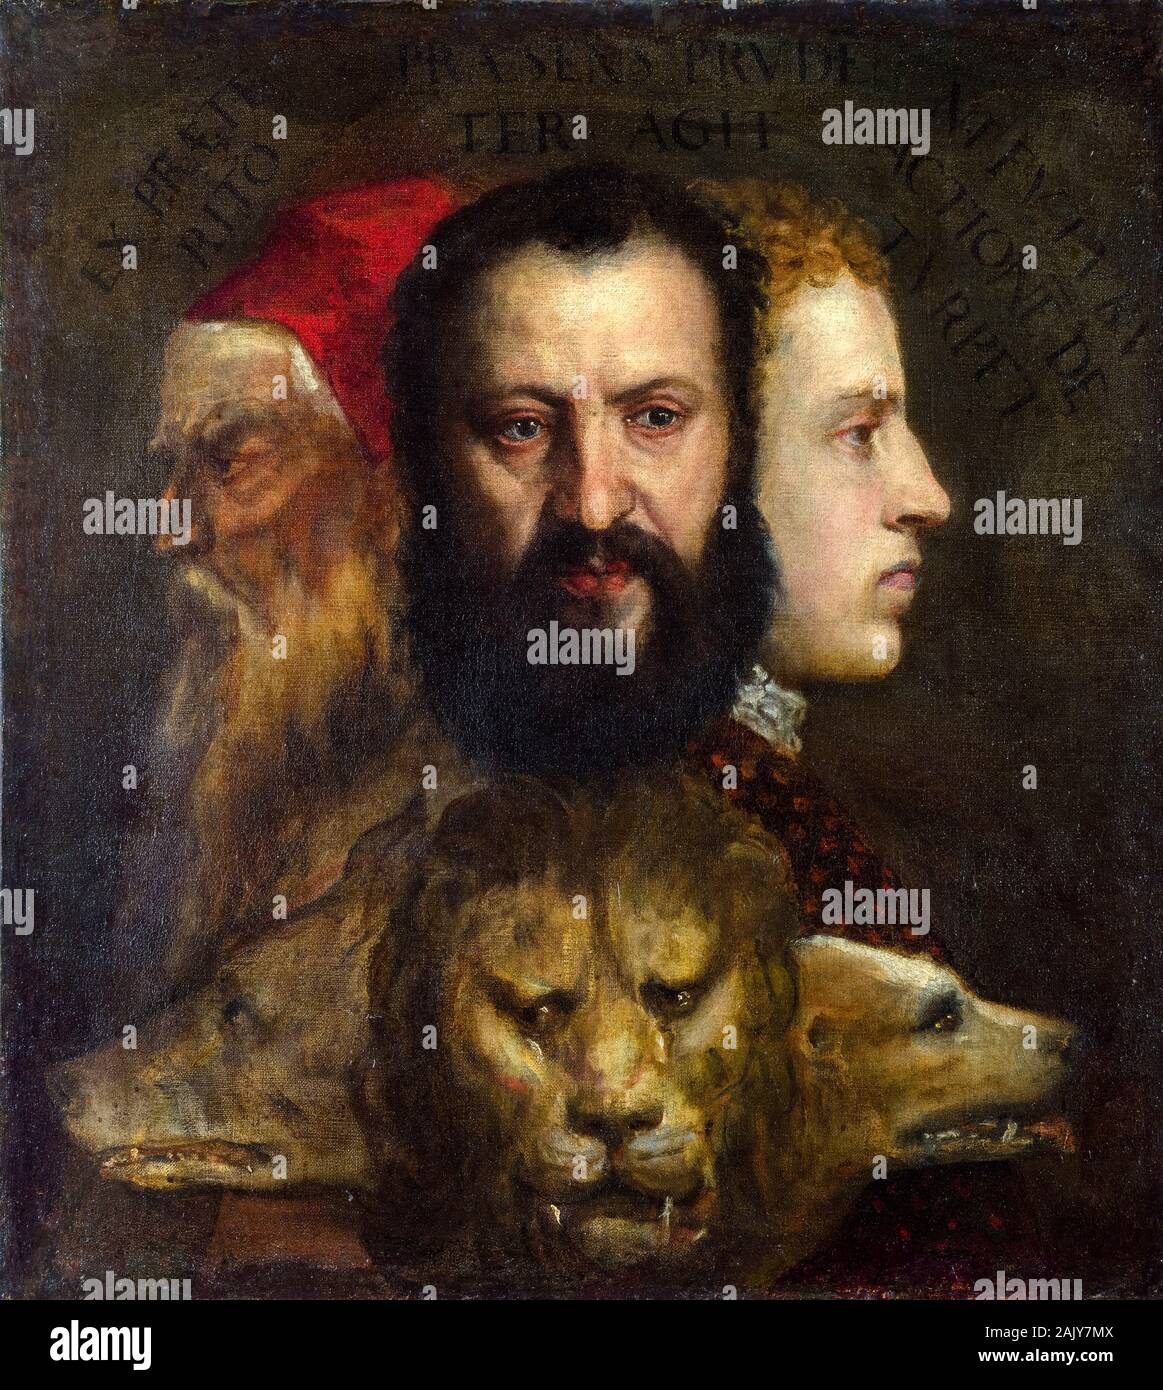 Titian, painting, Allegory of Prudence, 1550-1565 Stock Photo